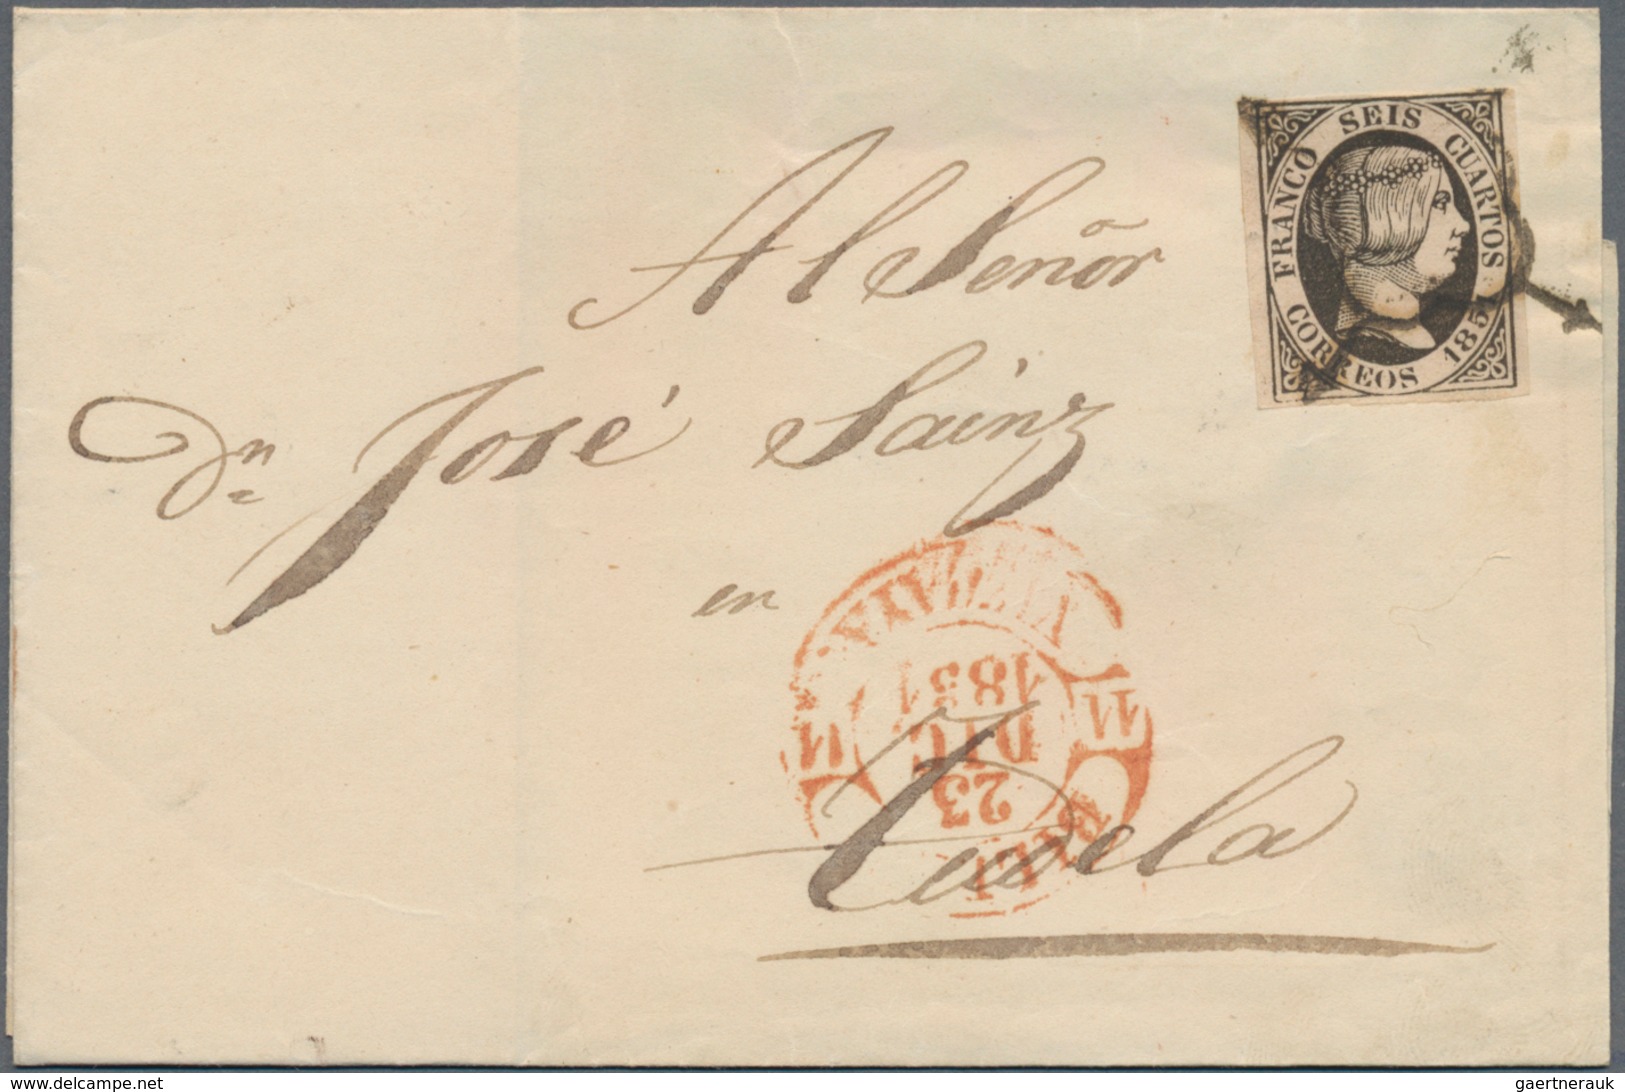 Spanien: 1850/1852, 30 Covers Franked With 4 Cuartos Isabella II. Fine To Very Fine. - Briefe U. Dokumente